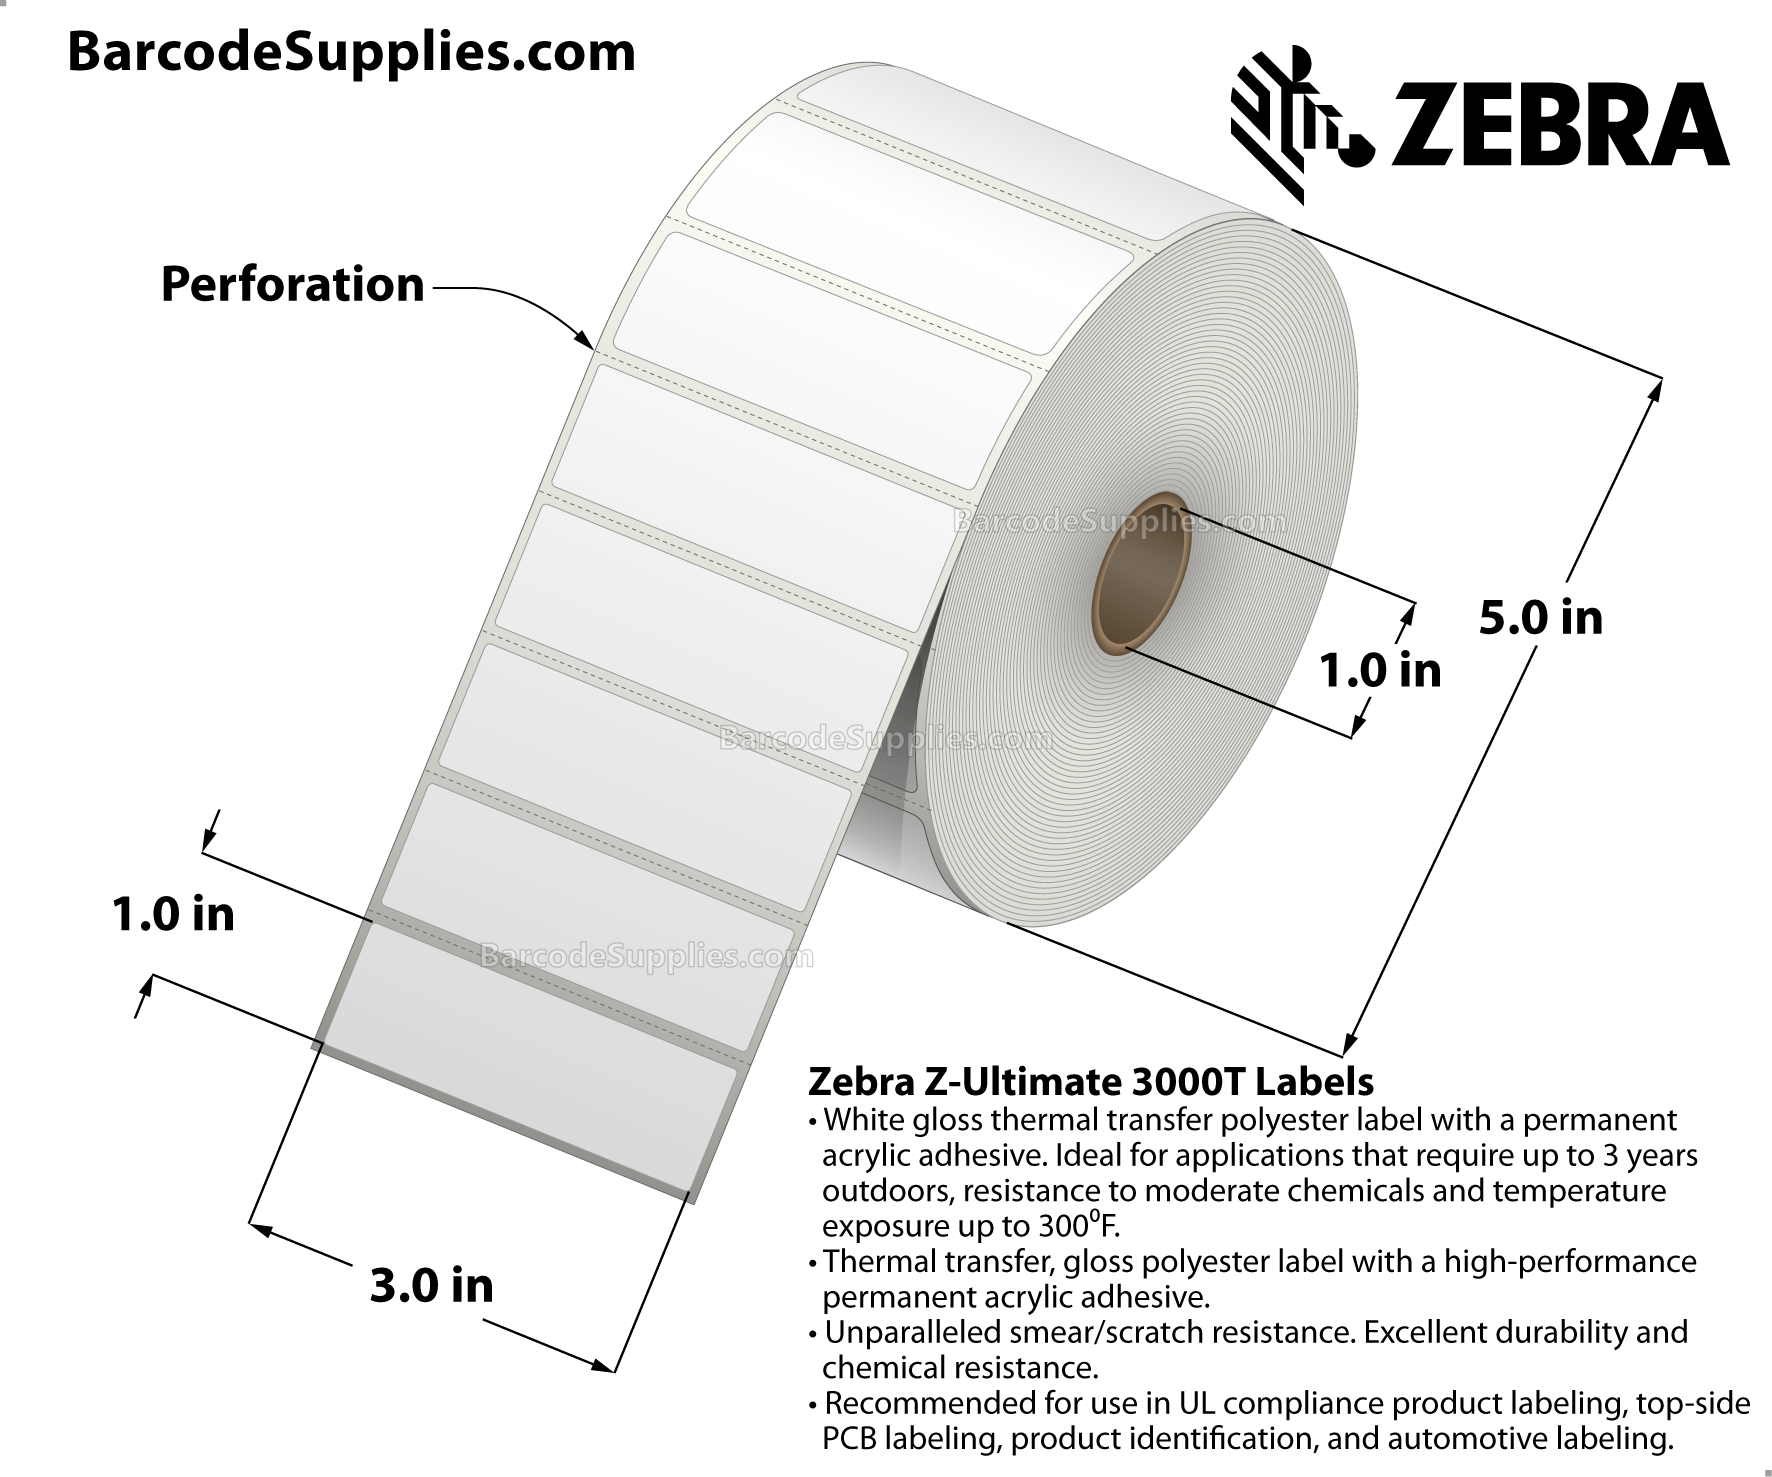 3 x 1 Thermal Transfer White Z-Ultimate 3000T Labels With Permanent Adhesive - Perforated - 2530 Labels Per Roll - Carton Of 8 Rolls - 20240 Labels Total - MPN: 18939